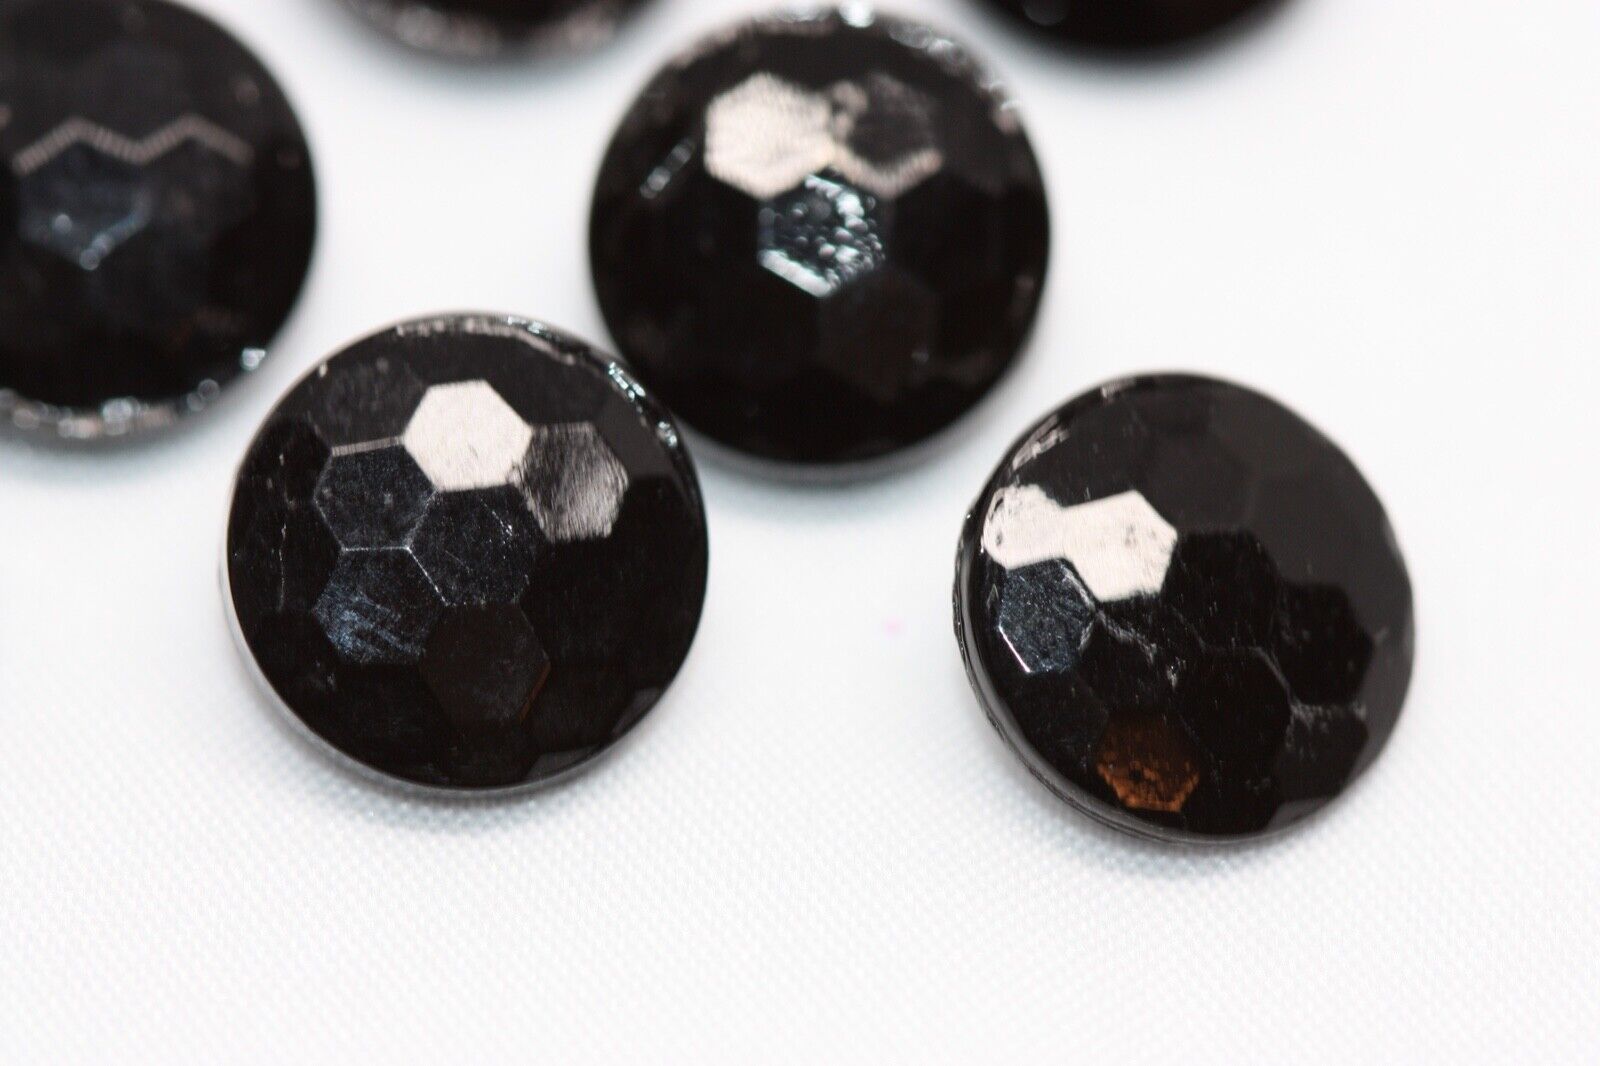 8 Vintage Le Chic Black Glass Honeycomb Buttons Round Faceted Jet Mourning Без бренда - фотография #8